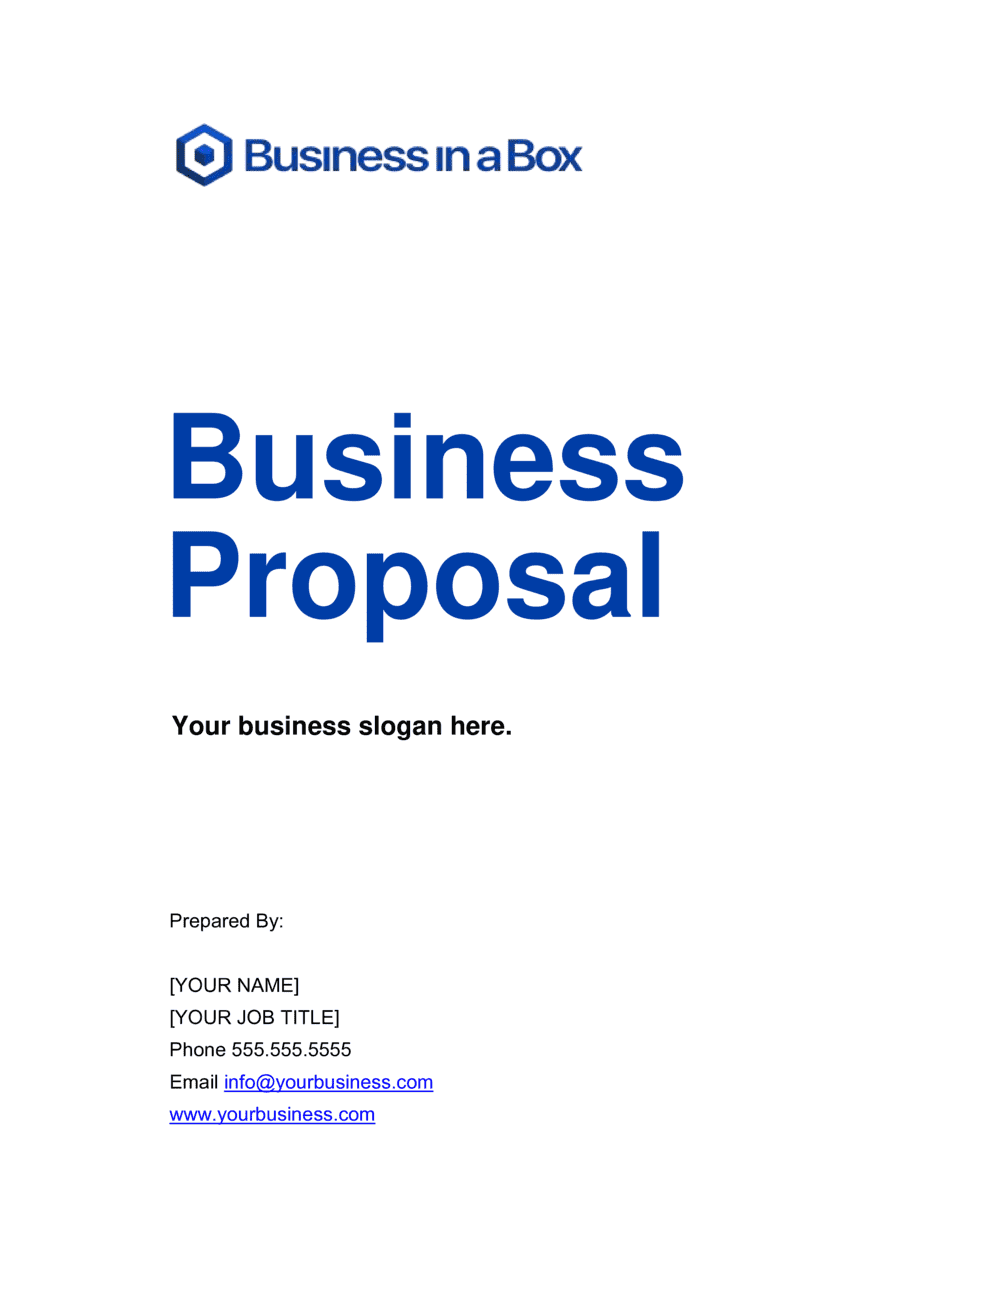 https://templates.business-in-a-box.com/imgs/1000px/business-proposal-short-D12607.png